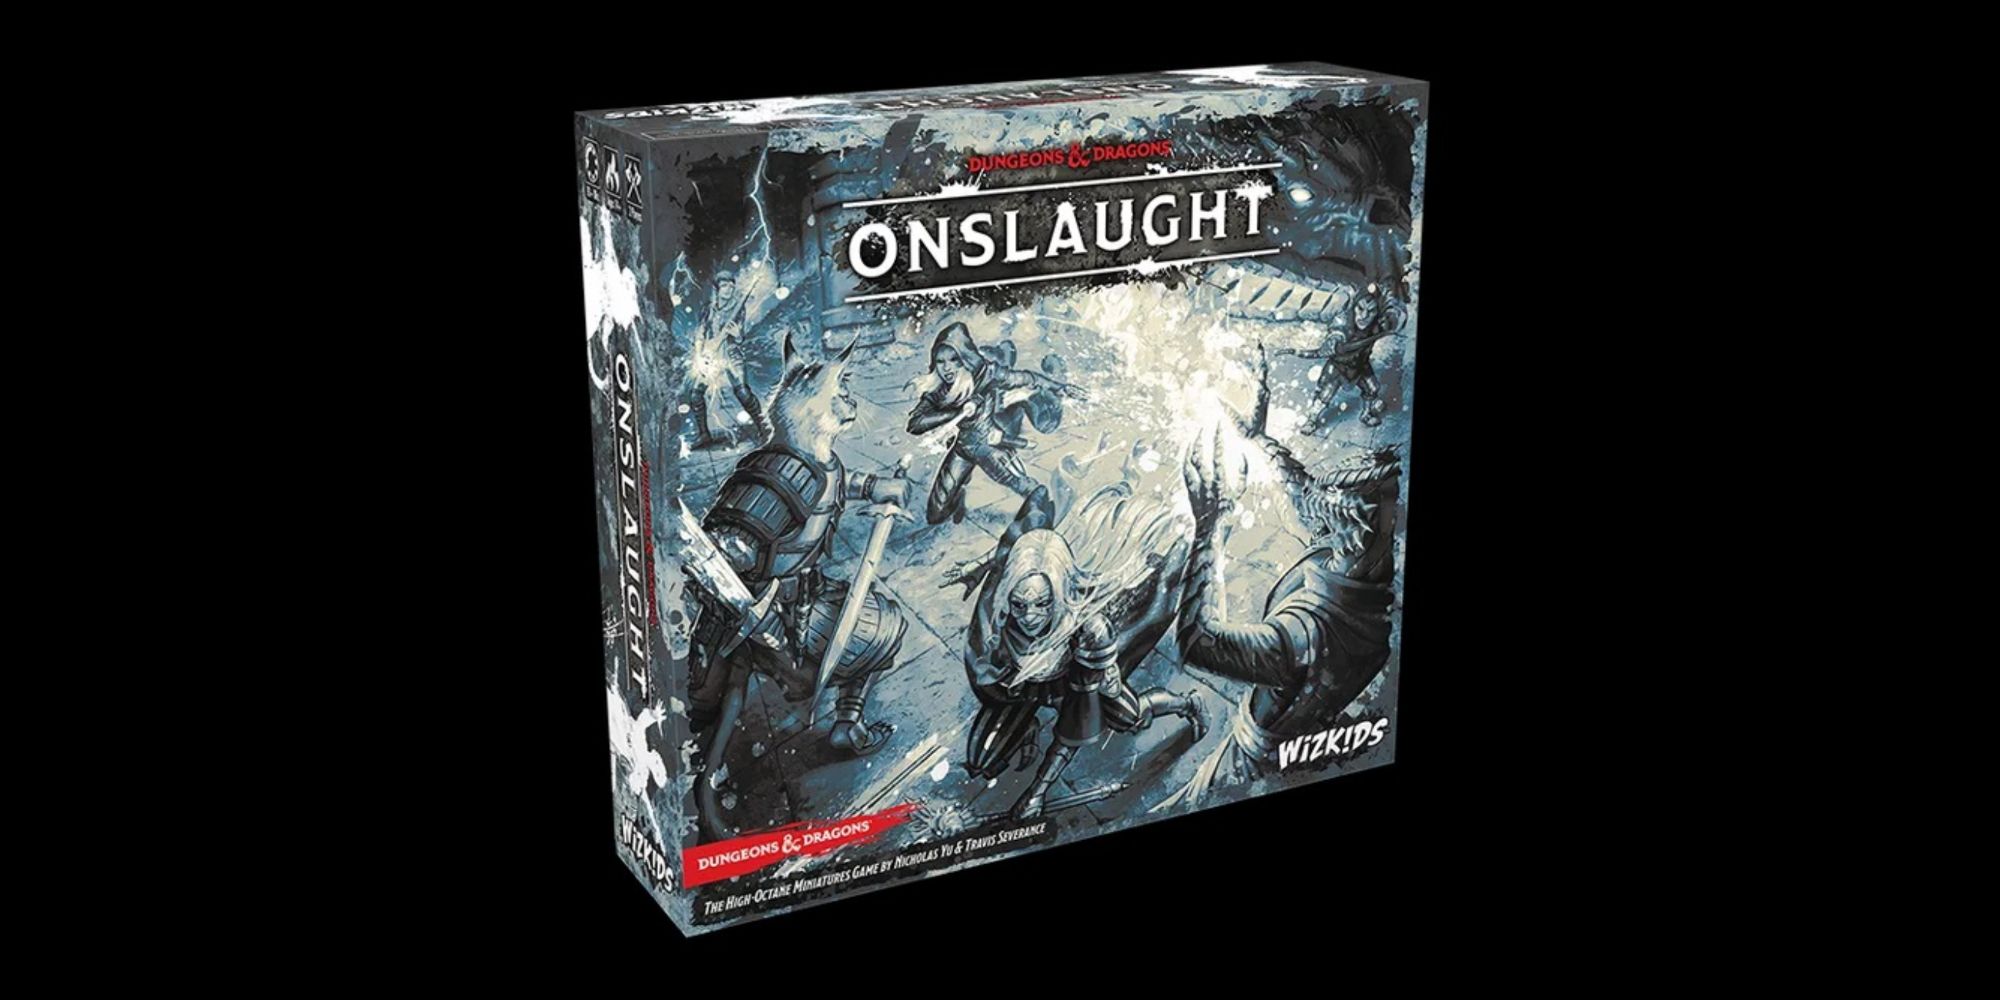 The box art for Dungeons & Dragons Onslaught